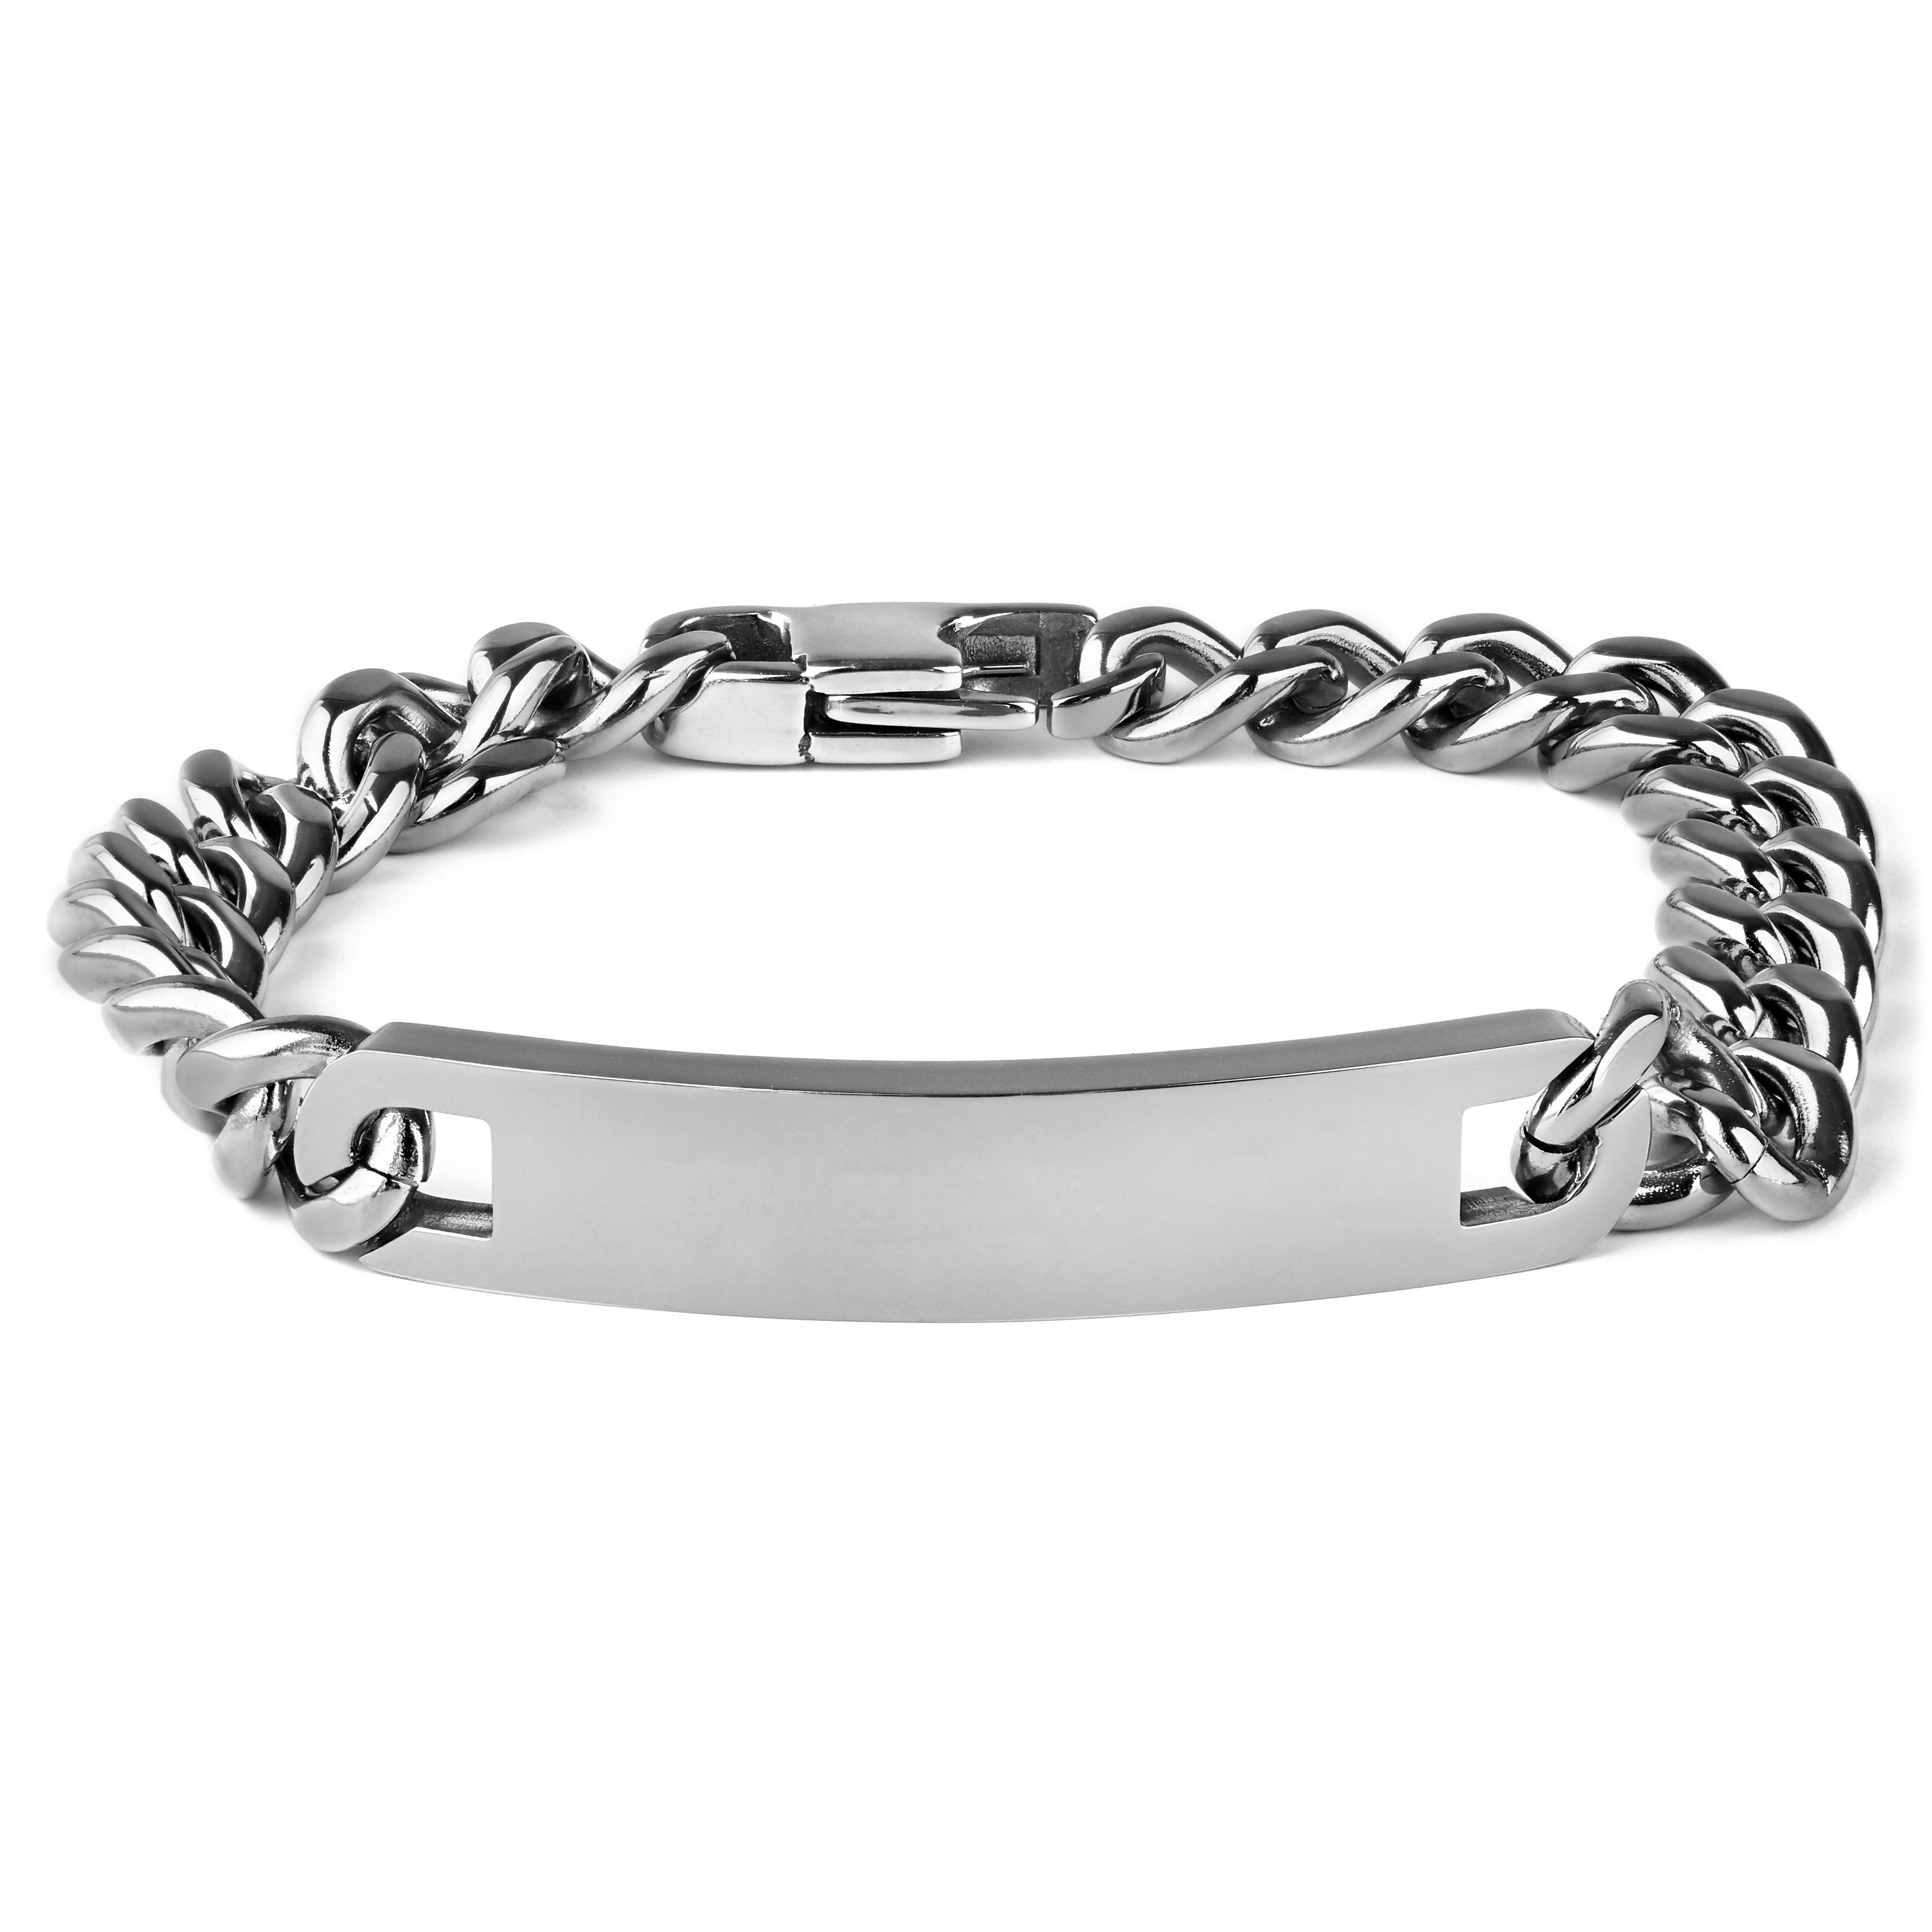 10mm Chunky Silver-Tone Stainless Steel ID Bracelet